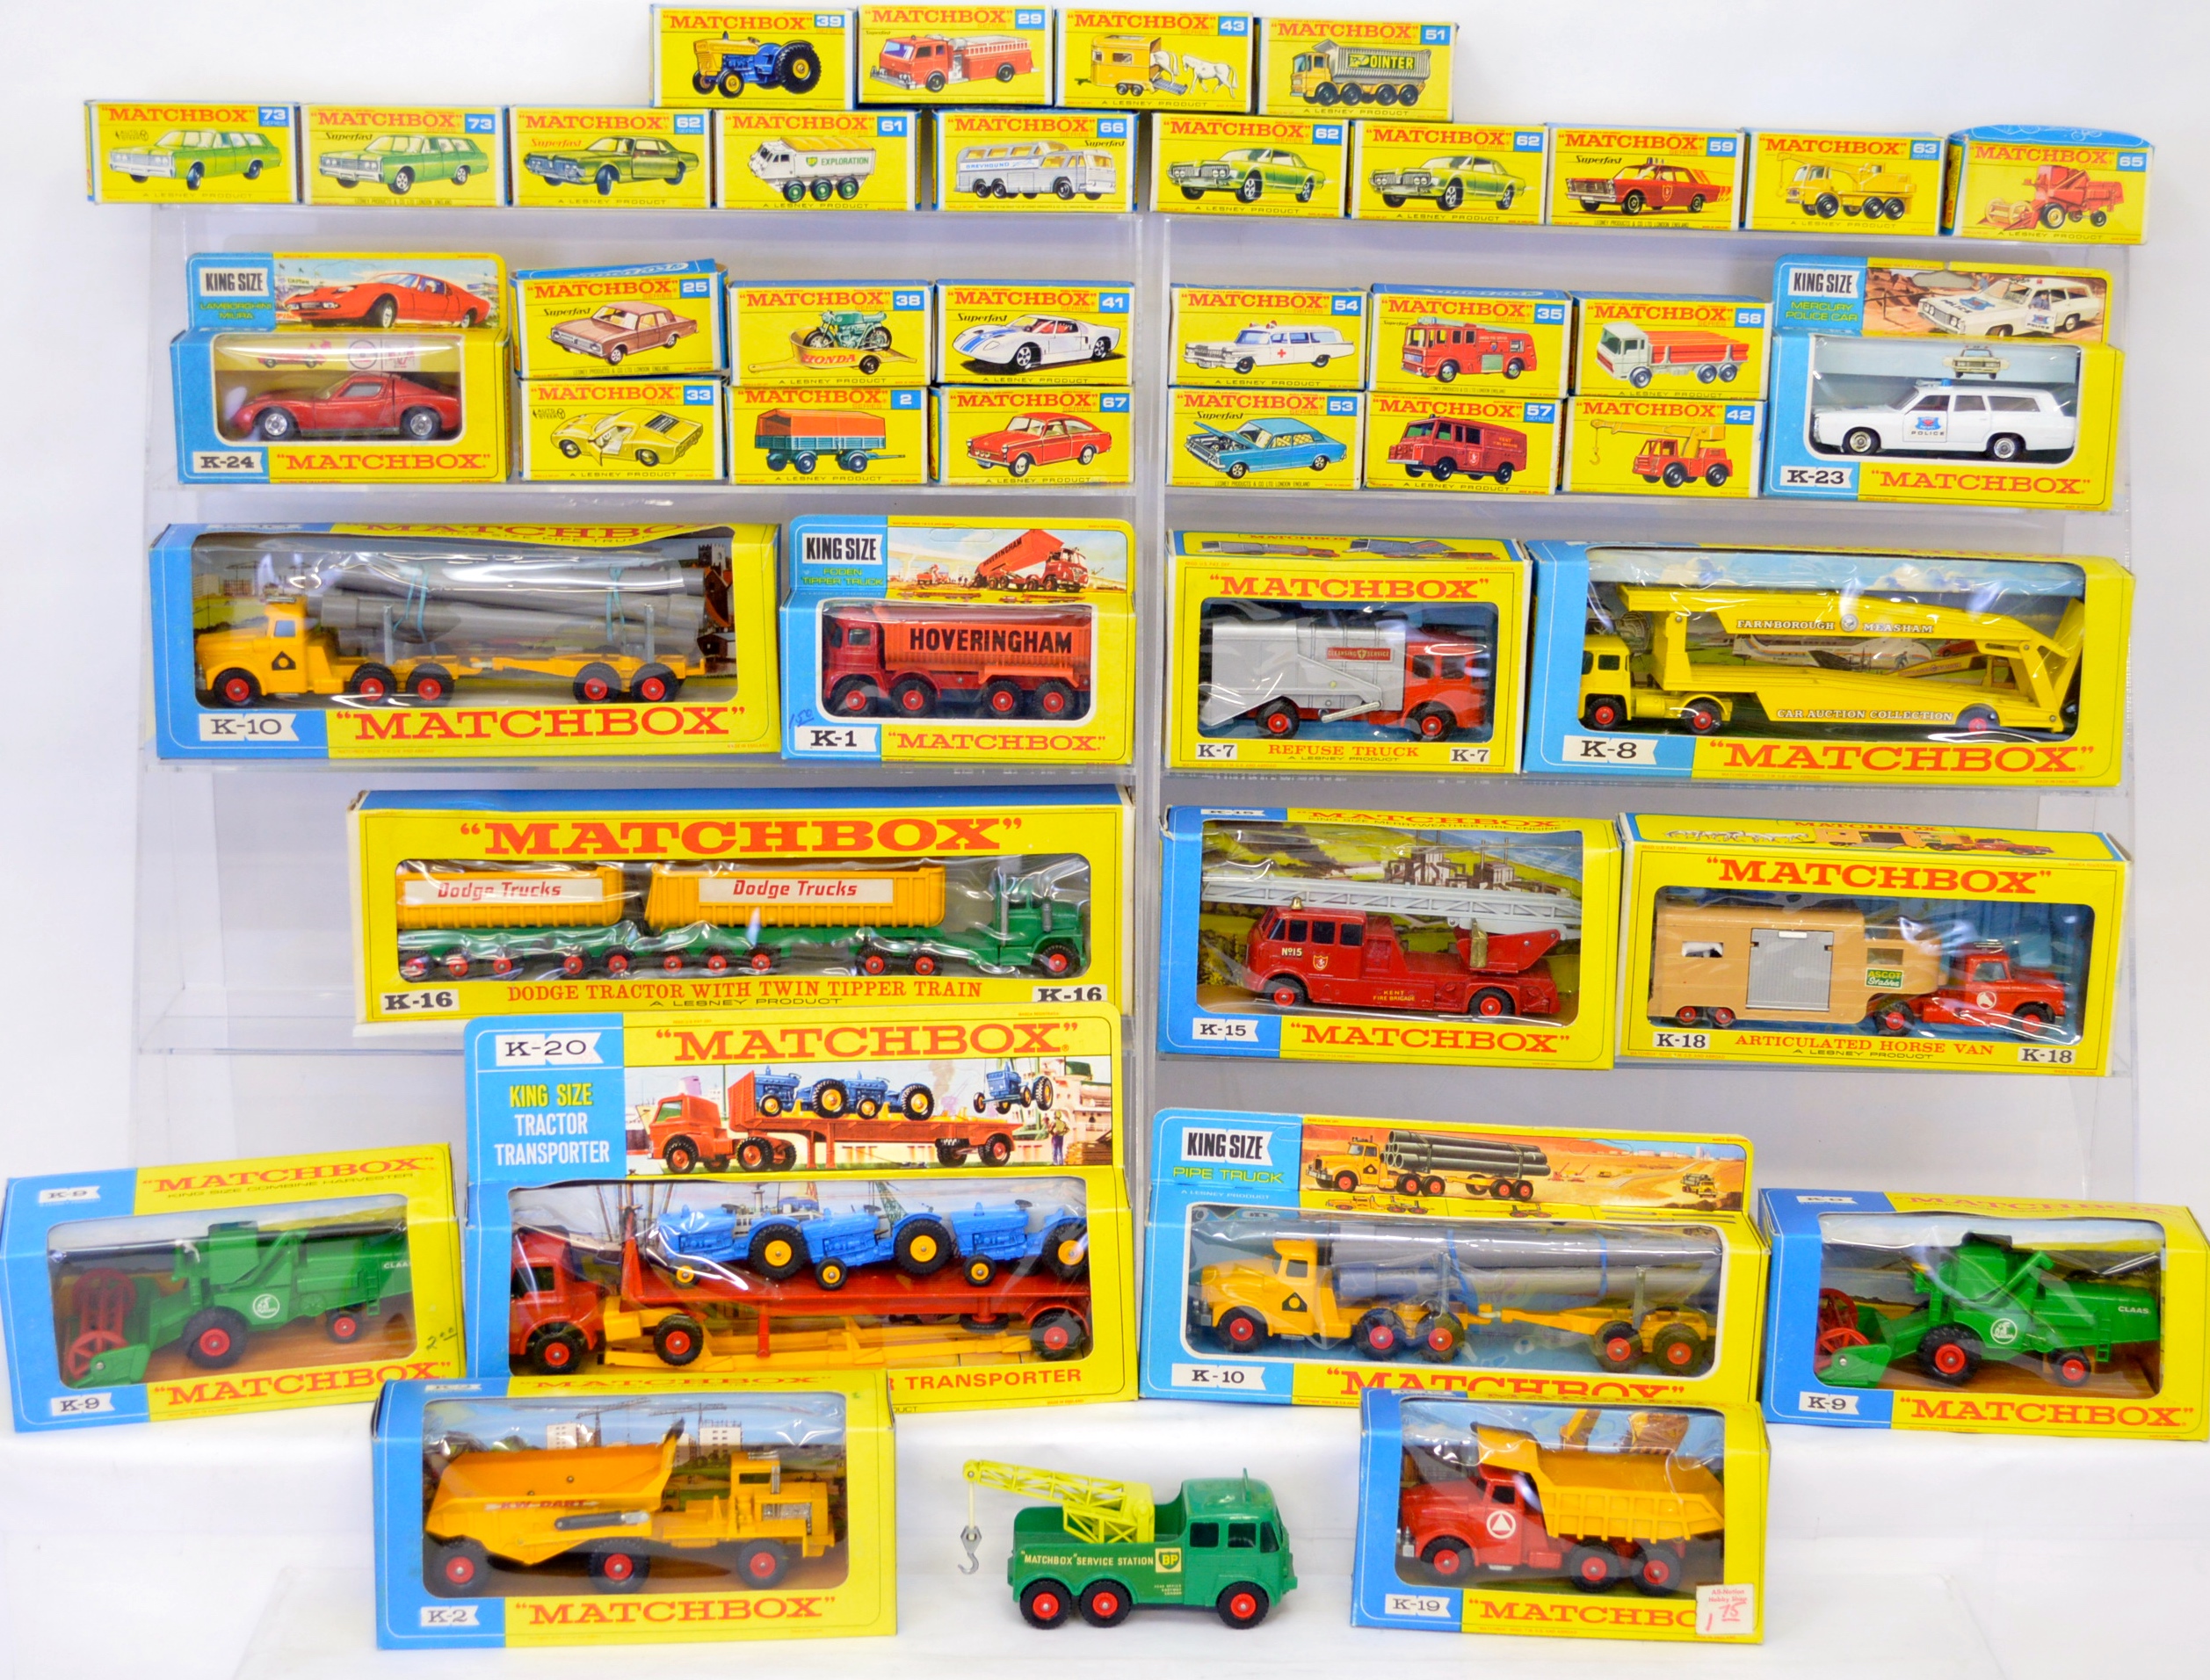 Vintage Die Cast, Model Train & Railroadiana Auction – Toys Trains and ...